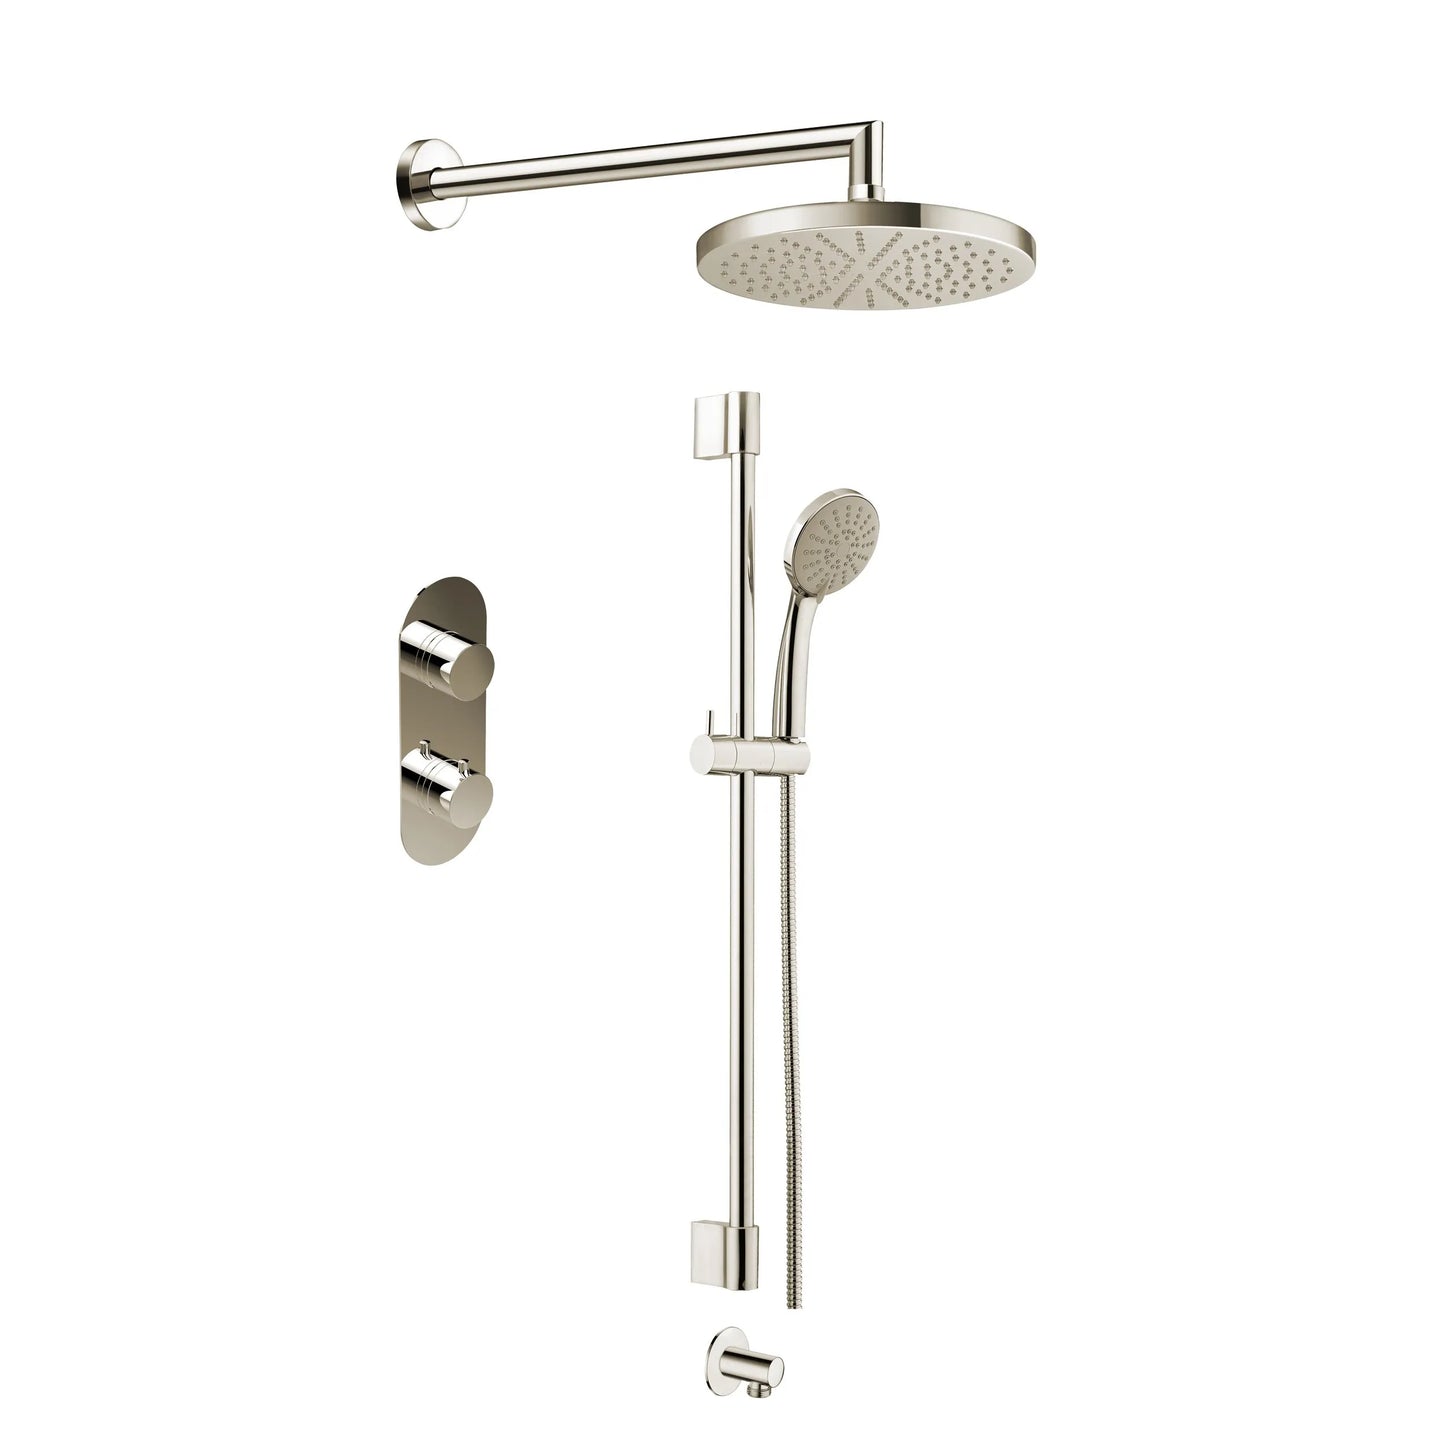 Aquadesign Products Shower Kit (System X10) - Polished Nickel